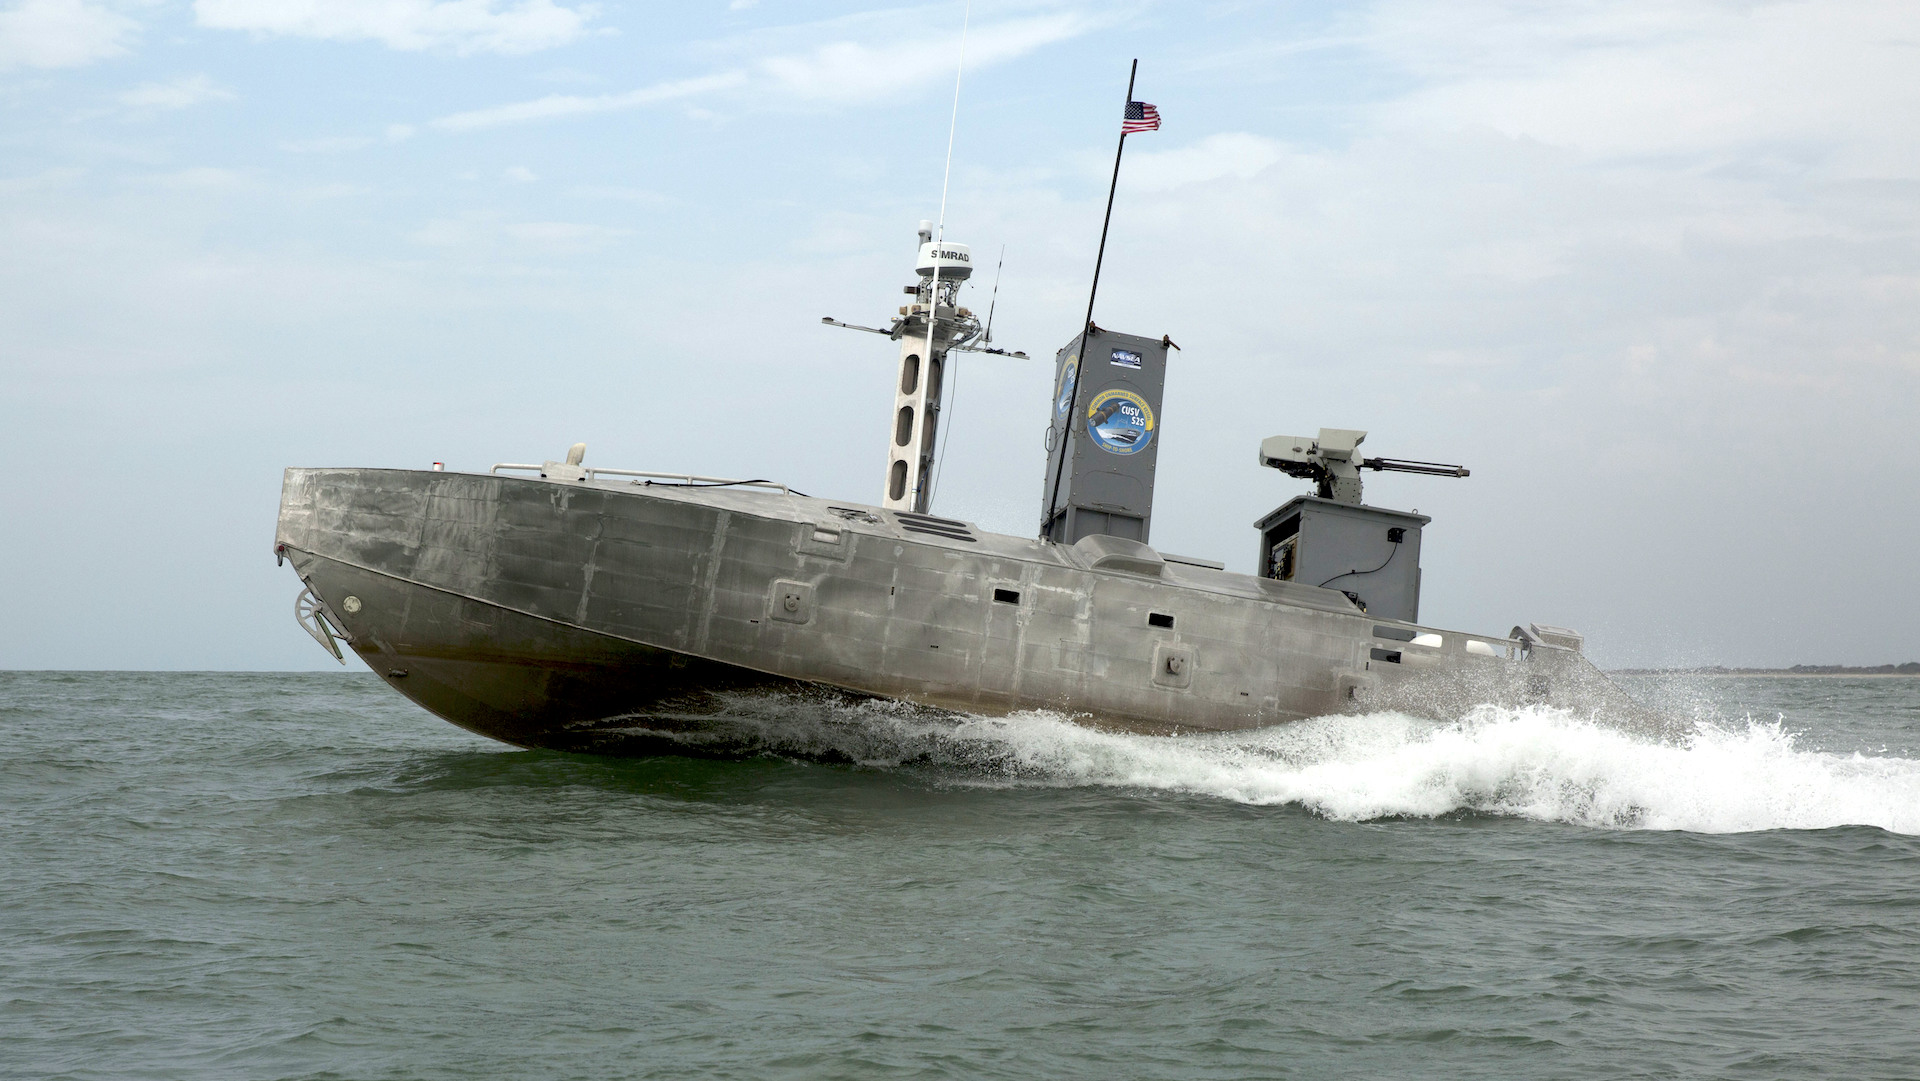 expeditionary warfare unmanned surface vessel drone boat